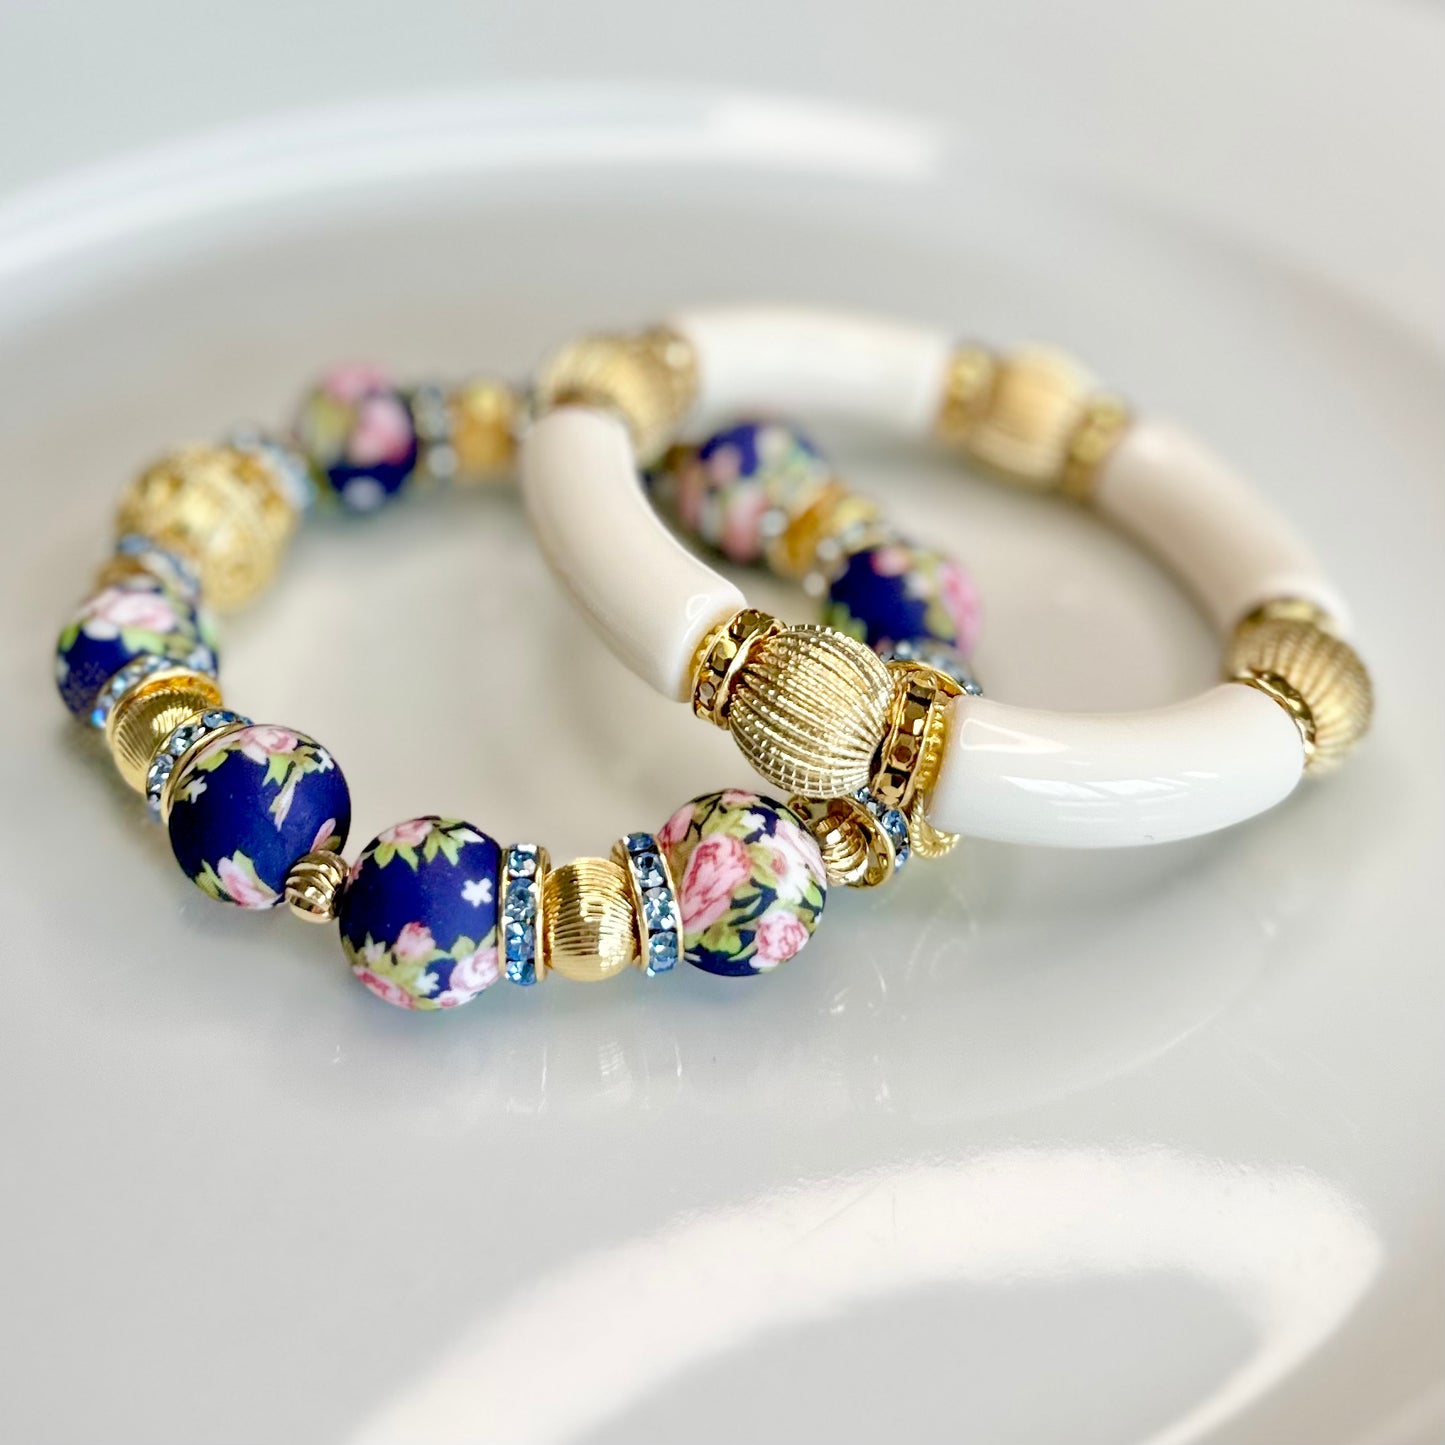 NAVY BLUE FLOWER AND TEXTURED SWIRL GOLD BANGLE WITH  GOLD AND CZ BANGLE